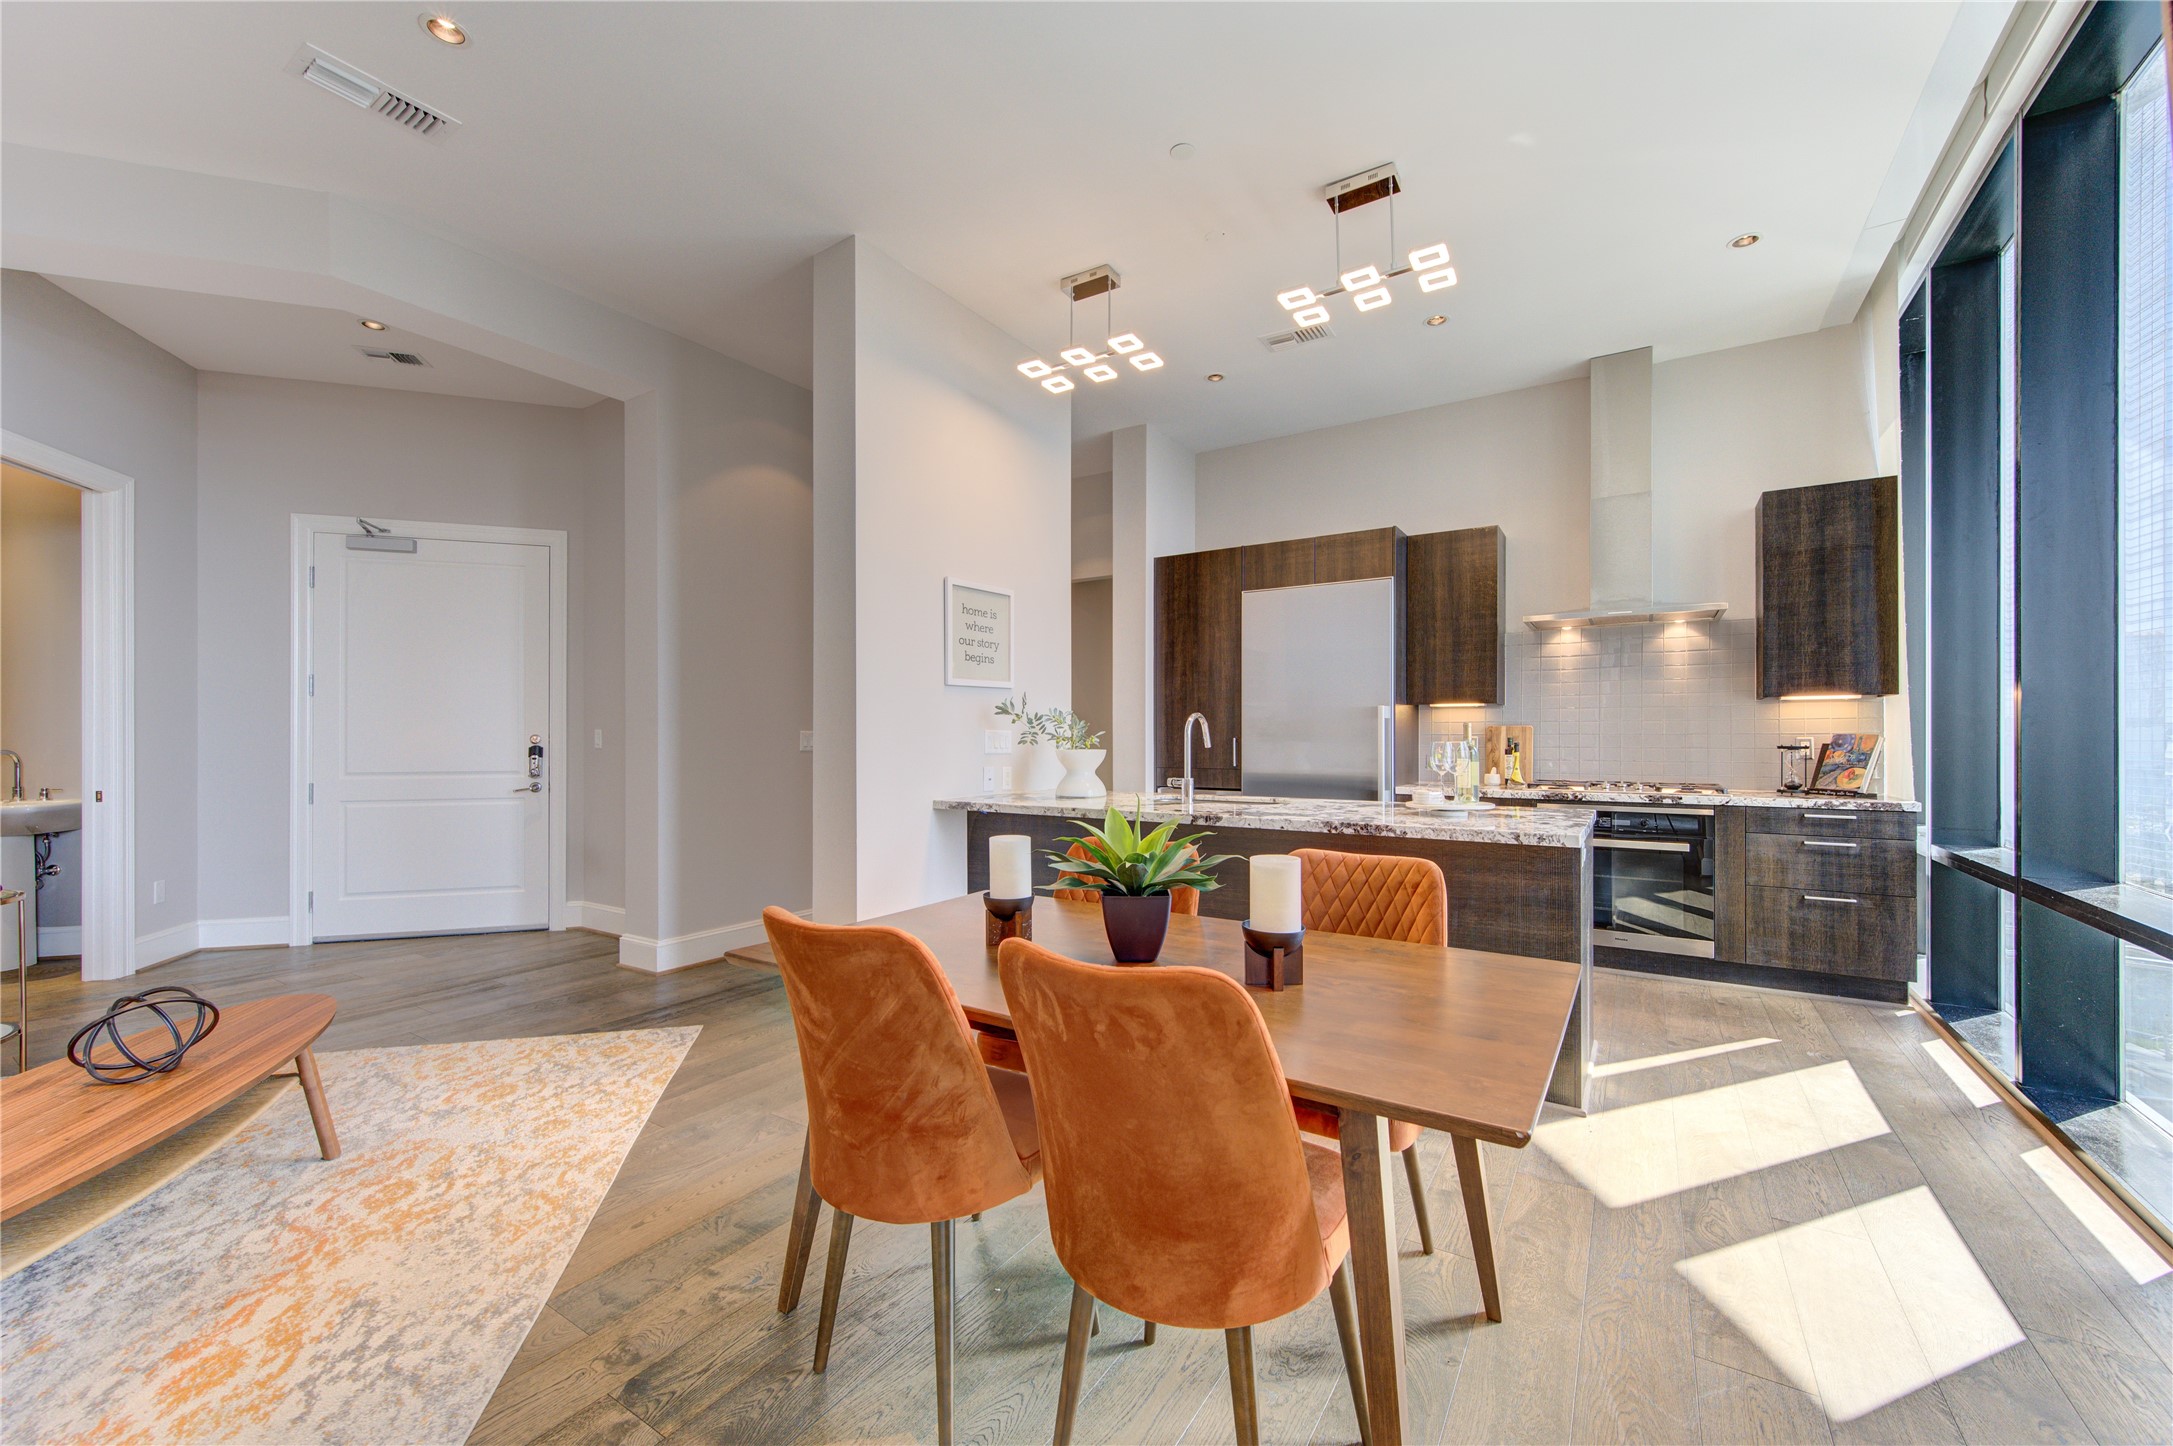 Entertain in style with this gorgeous kitchen open to a formal dining room.